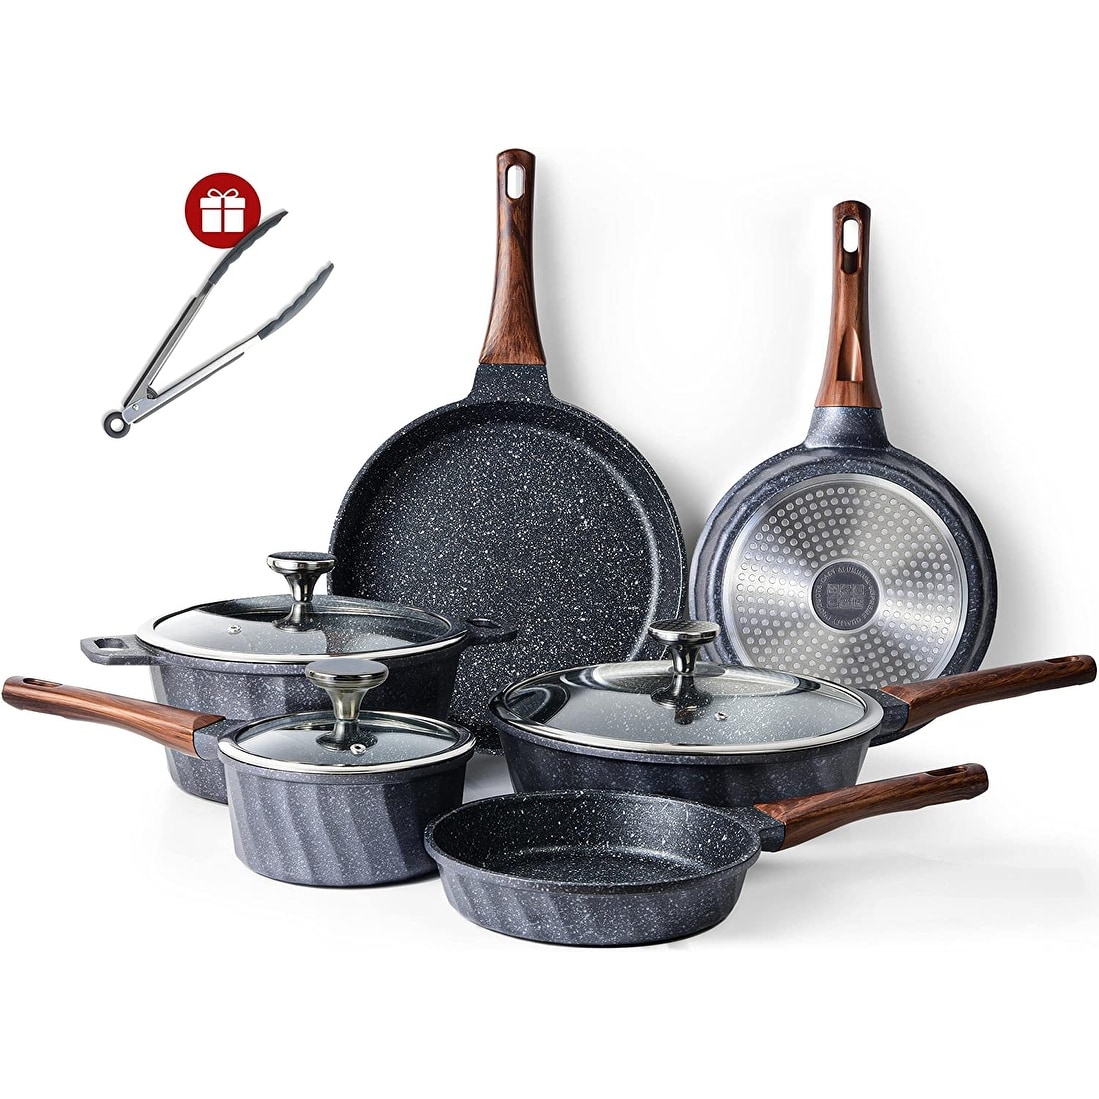 https://ak1.ostkcdn.com/images/products/is/images/direct/c7d58dd43dc8e759ccef26e77f0c52edc737863b/Induction-Pots-and-Pans-Set-Non-stick-Granite-Kitchen-Cookware-Sets-Nonstick-Kitchenware-Pans-for-Cooking-Pot-and-Pan-Set.jpg